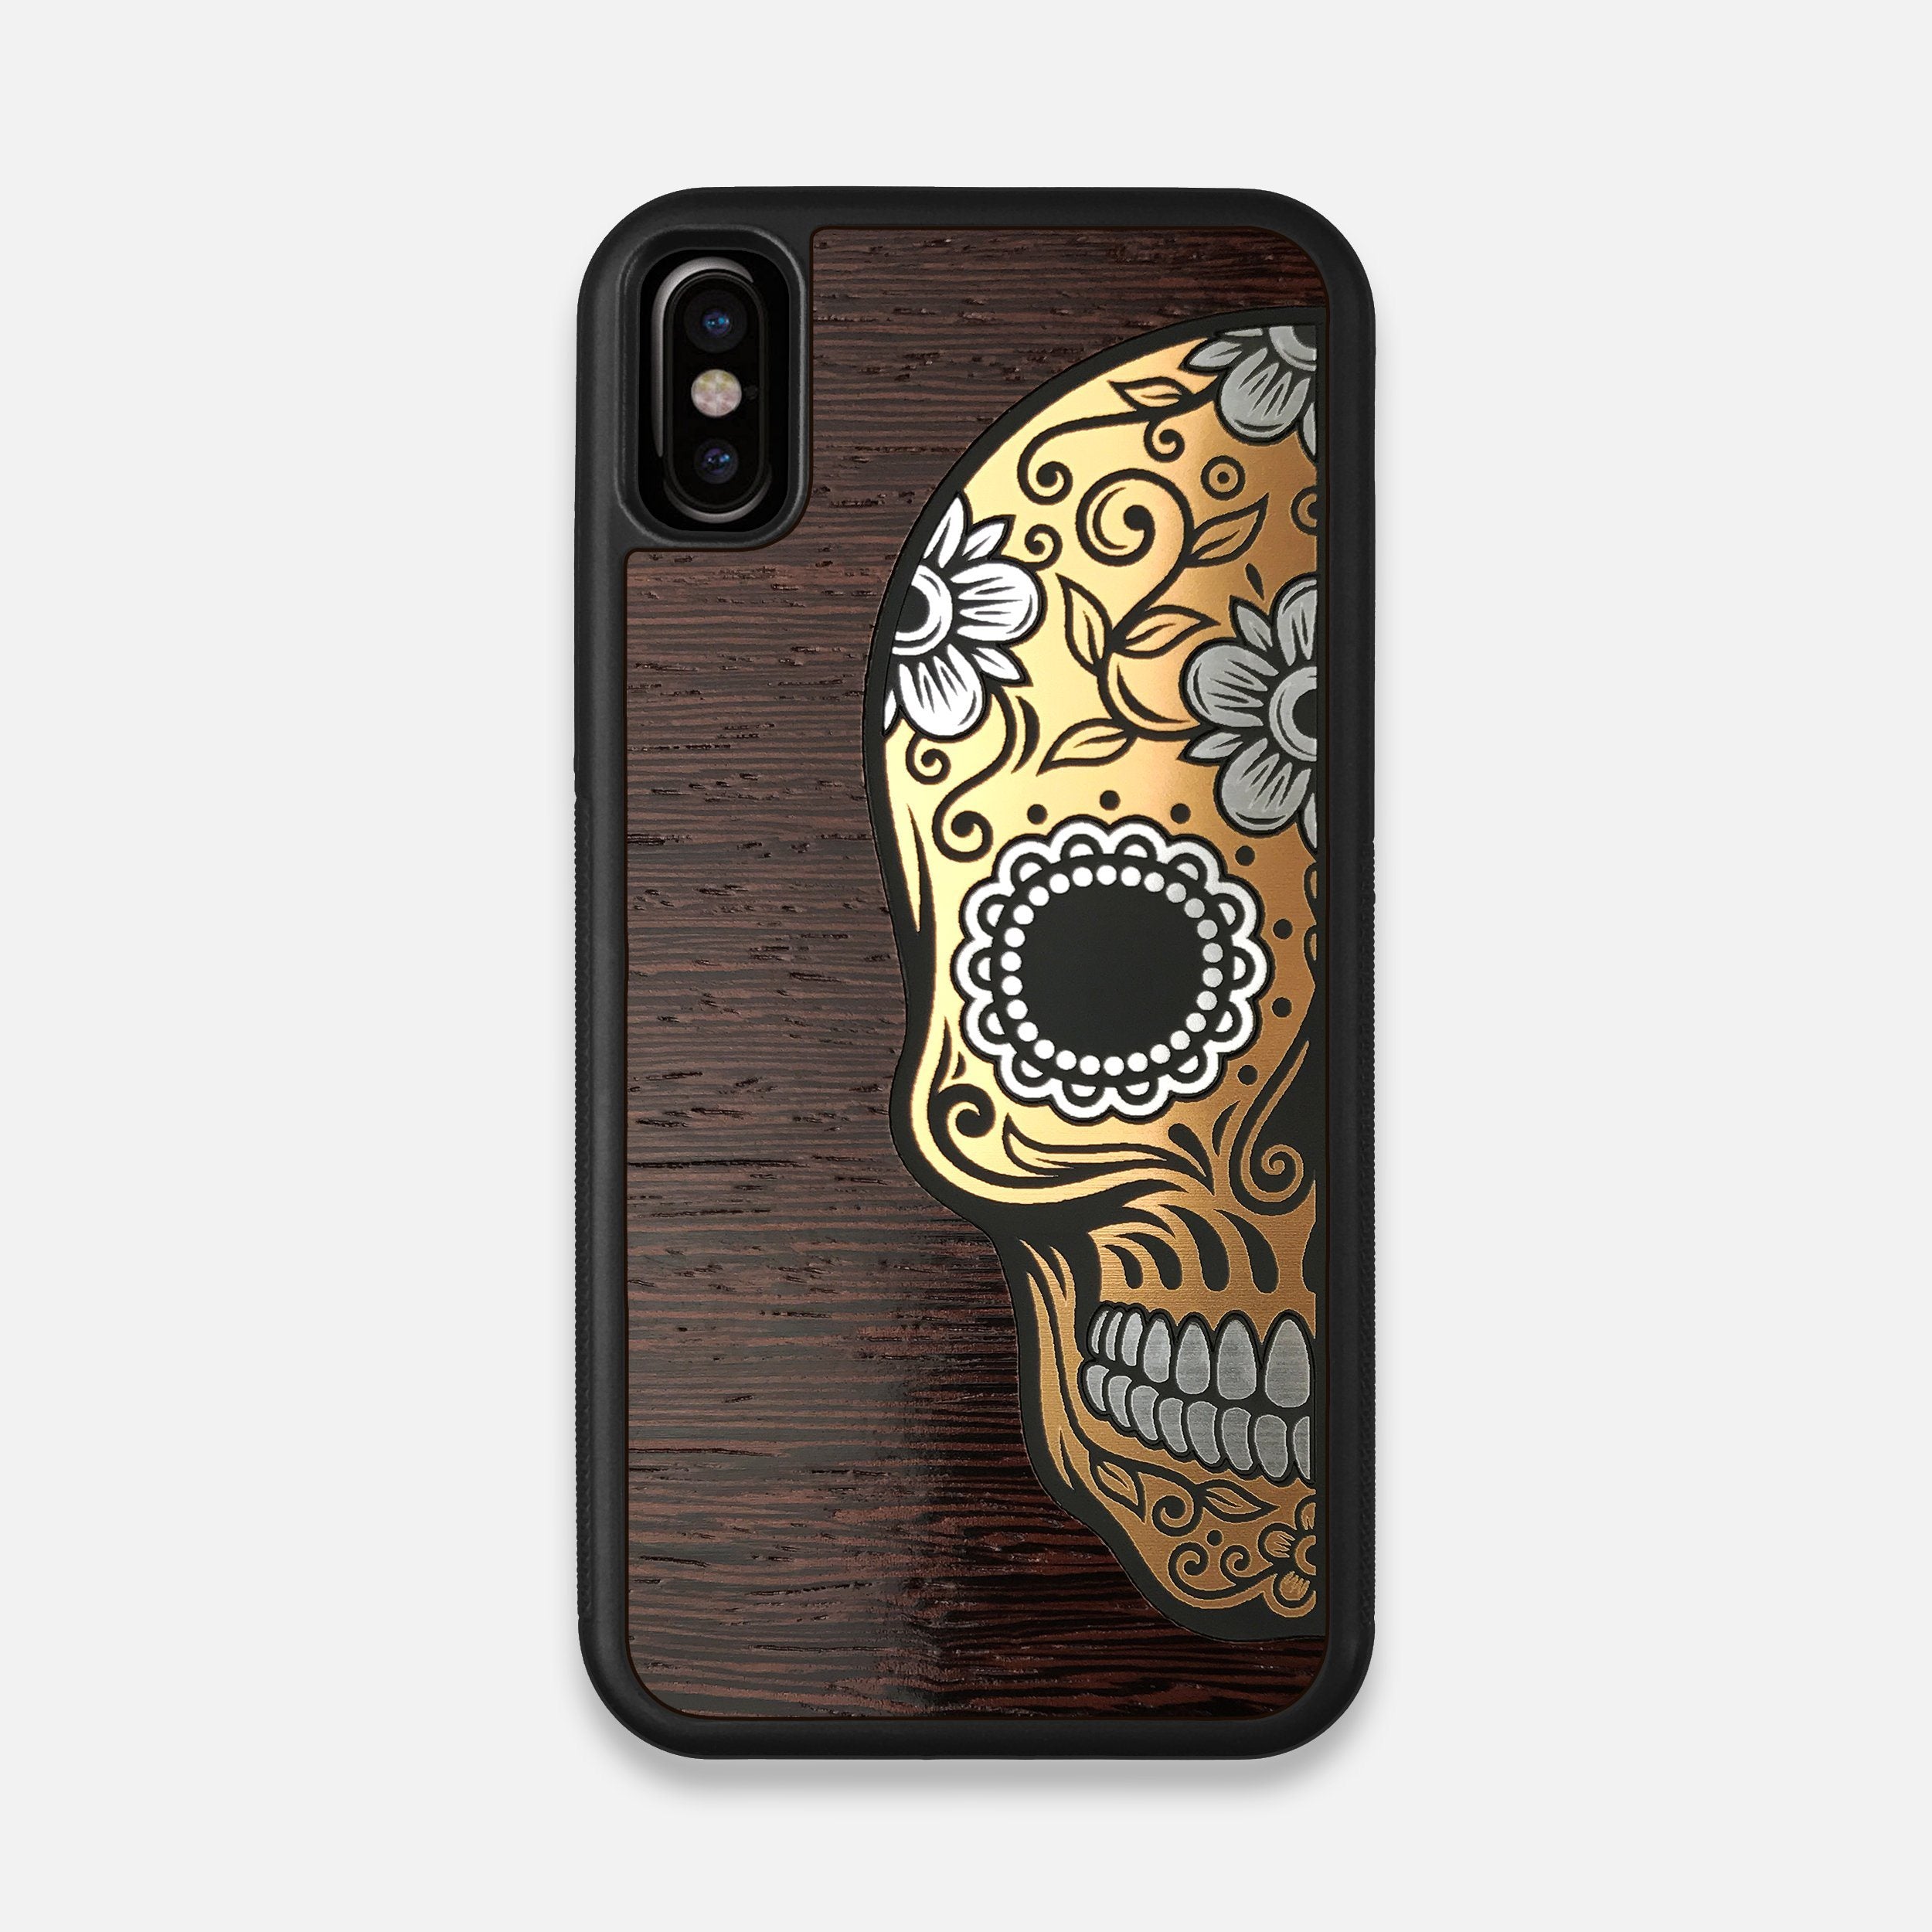 Front view of the Calavera Wood Sugar Skull Wood iPhone X Case by Keyway Designs